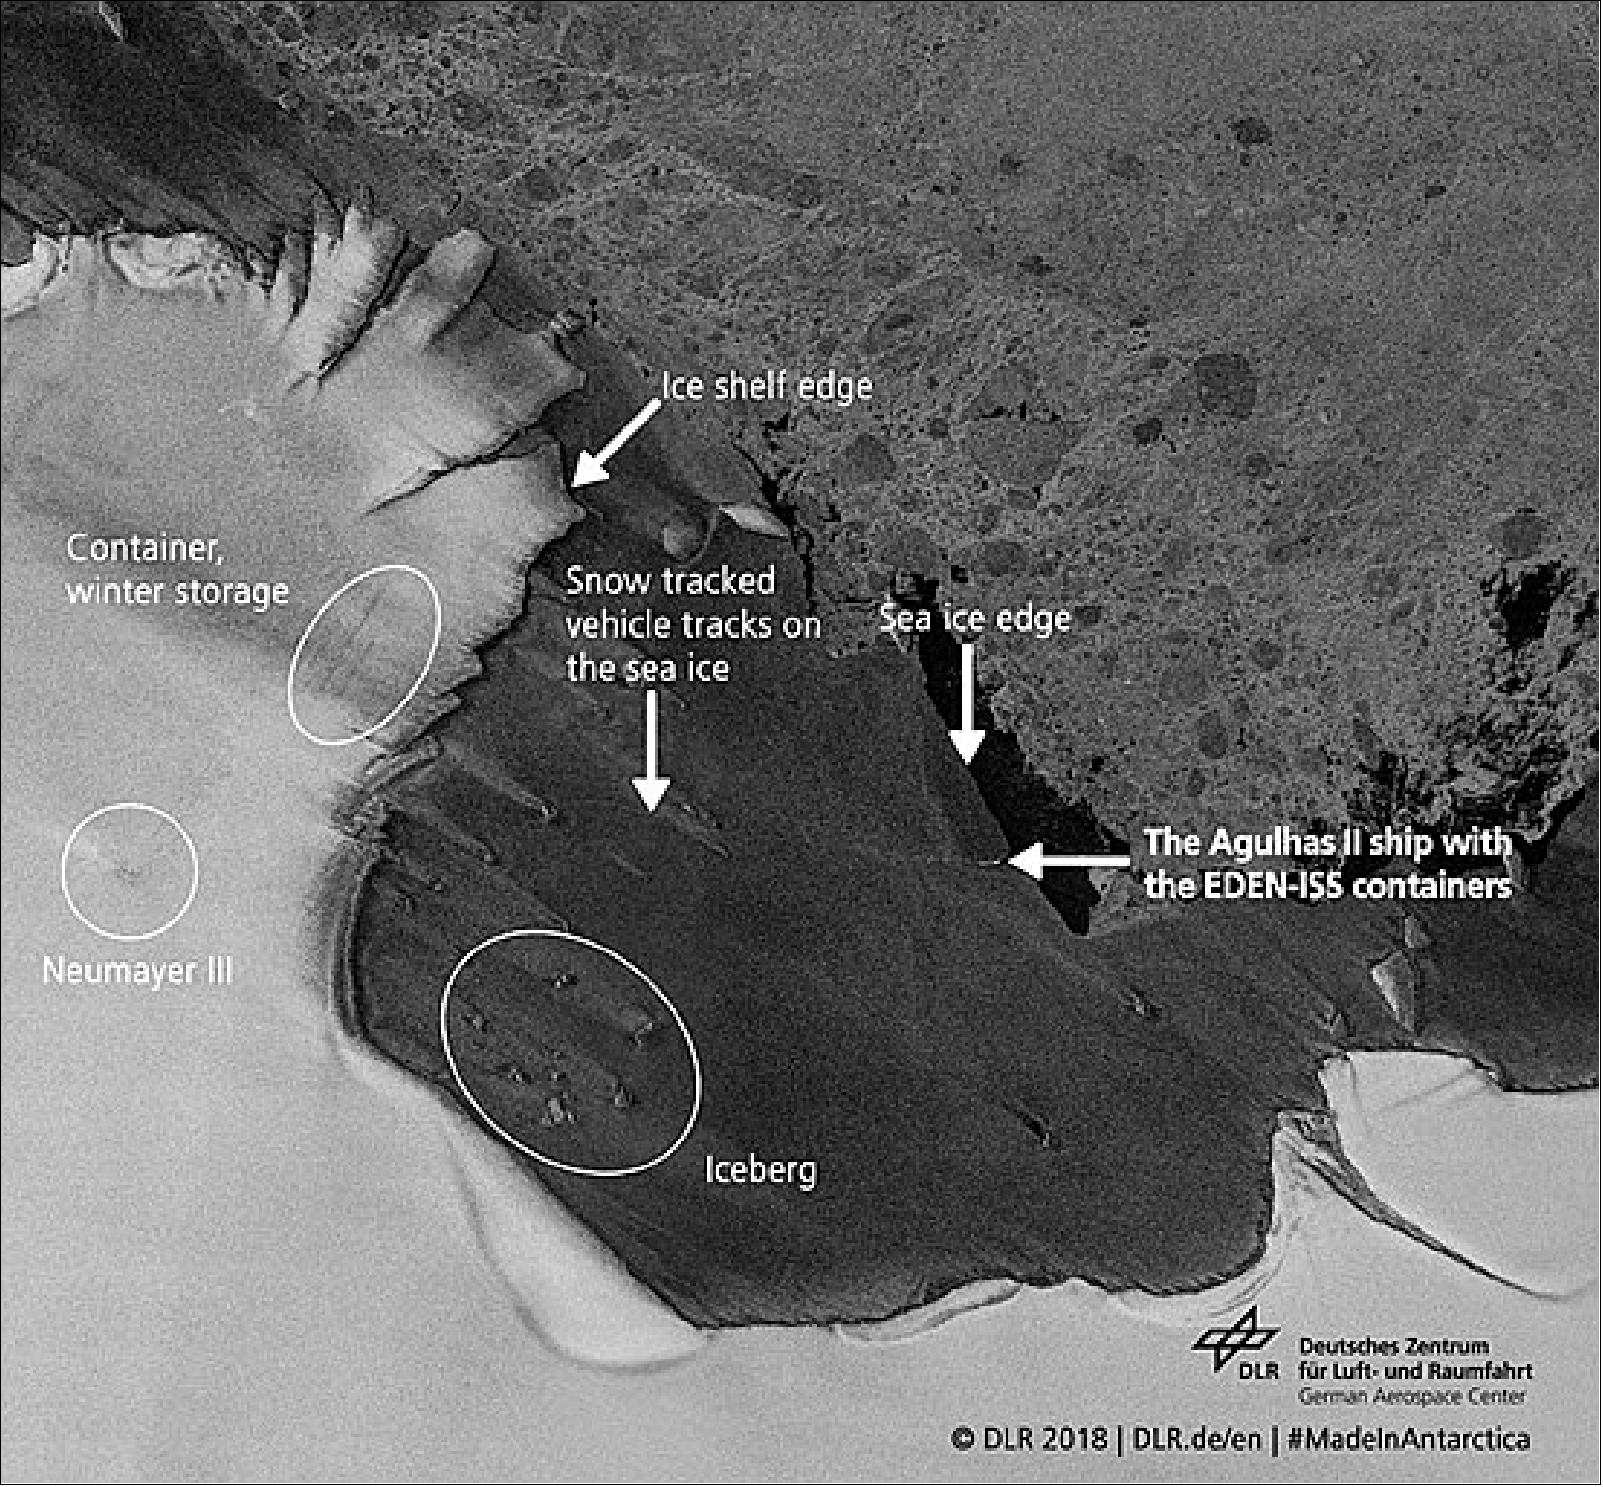 Figure 9: Localities at the Neumayer III Station on the Antarctic Ekström ice shelf as seen from space by the German TerraSAR-X satellite (image credit: DLR)